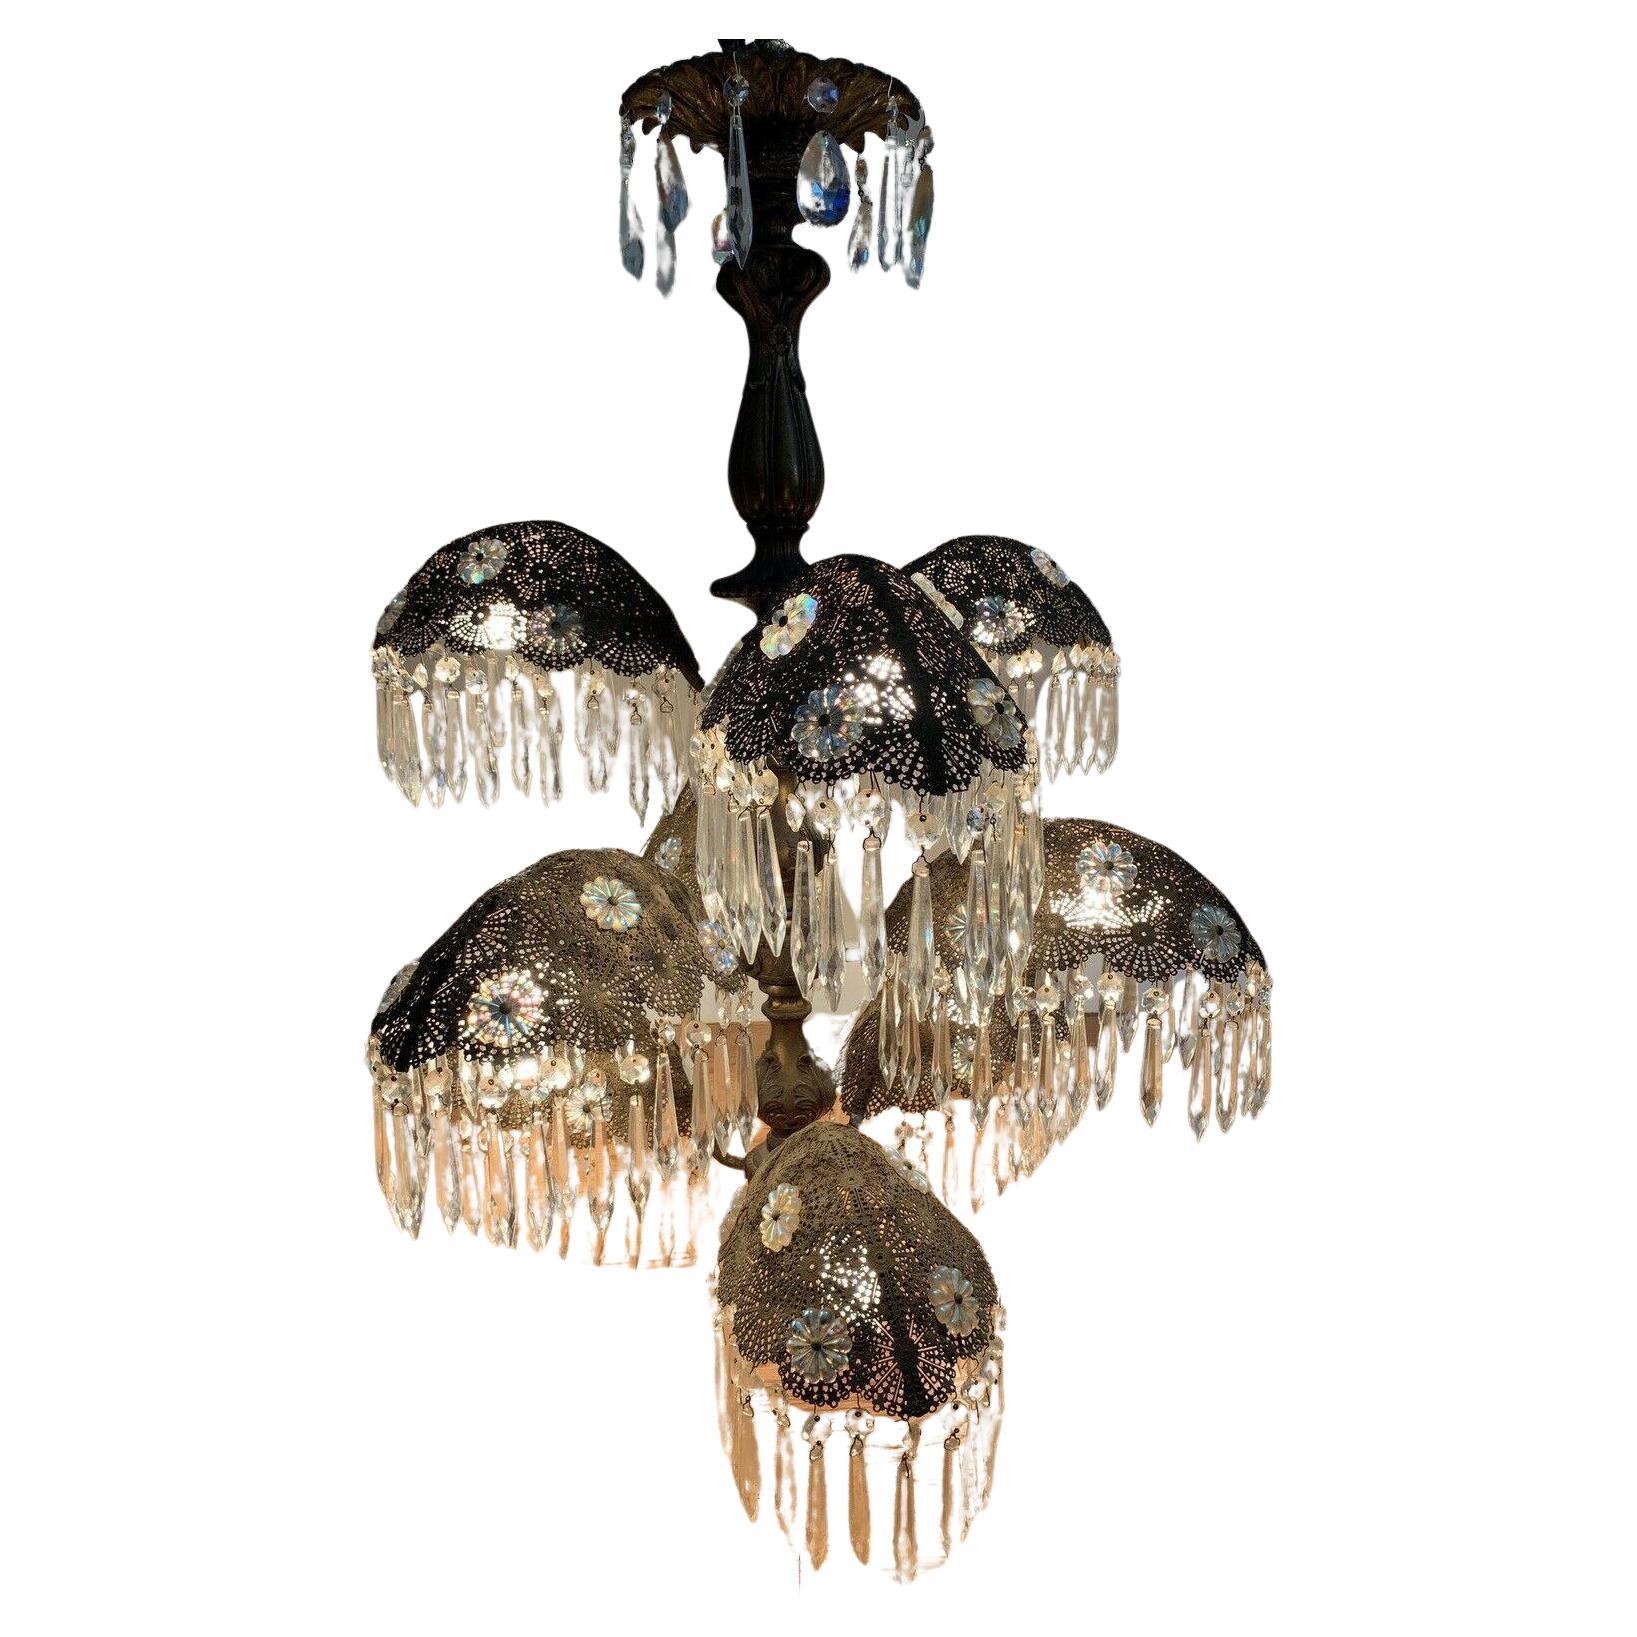 This is an outstanding 1930s European Art Deco Palm Frond Chandelier adorned with Cut Crystal U-Drops and Aurura Borealis Rosettes. Ornate filigree palm fronds. This chandelier was purchased at an estate sale on Miami Beach. 